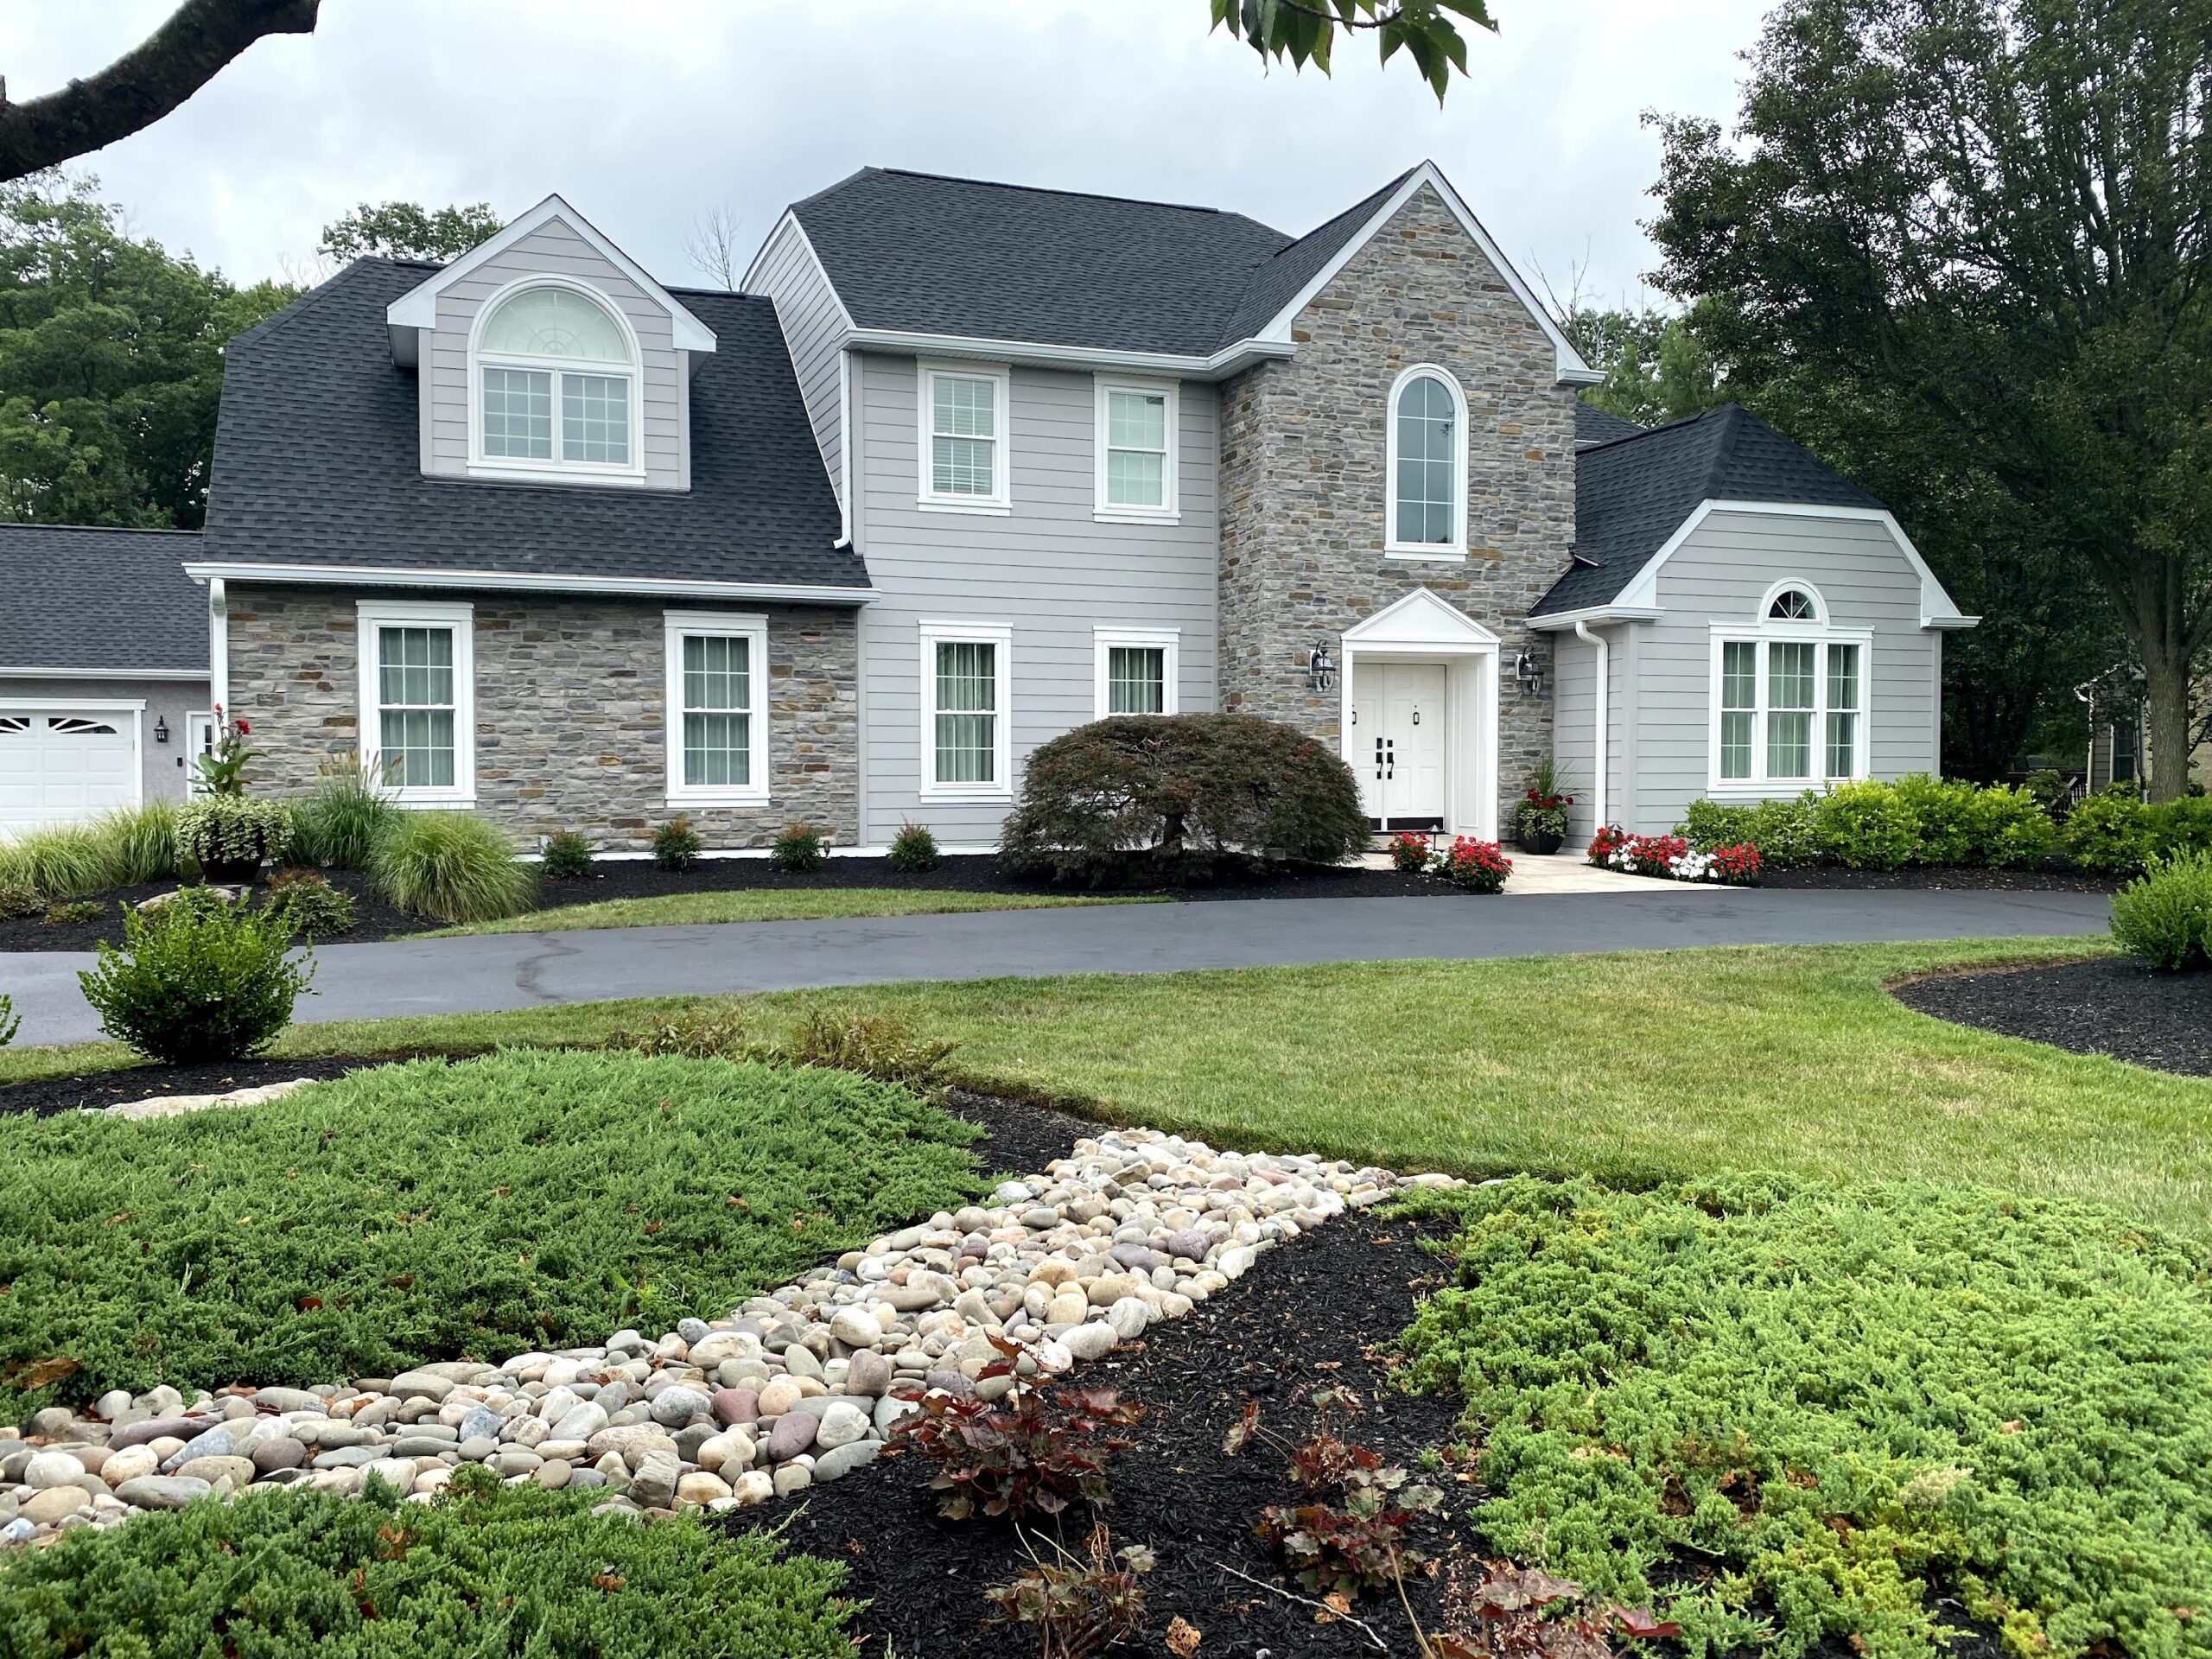 Large stone home with landscaping